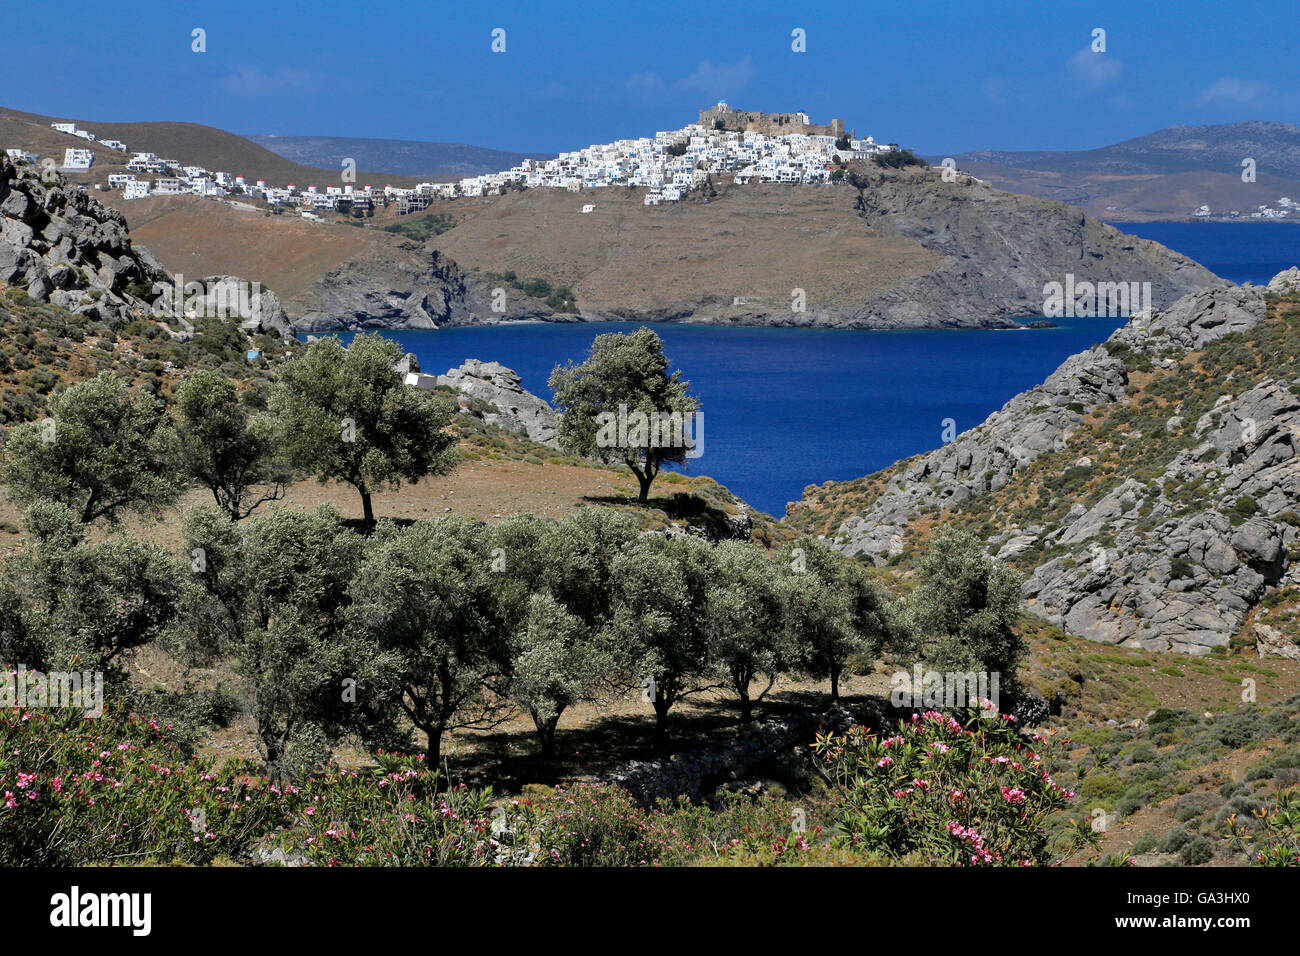 Olive trees and peaceful view on the Astypalaia Island, Greece Stock Photo